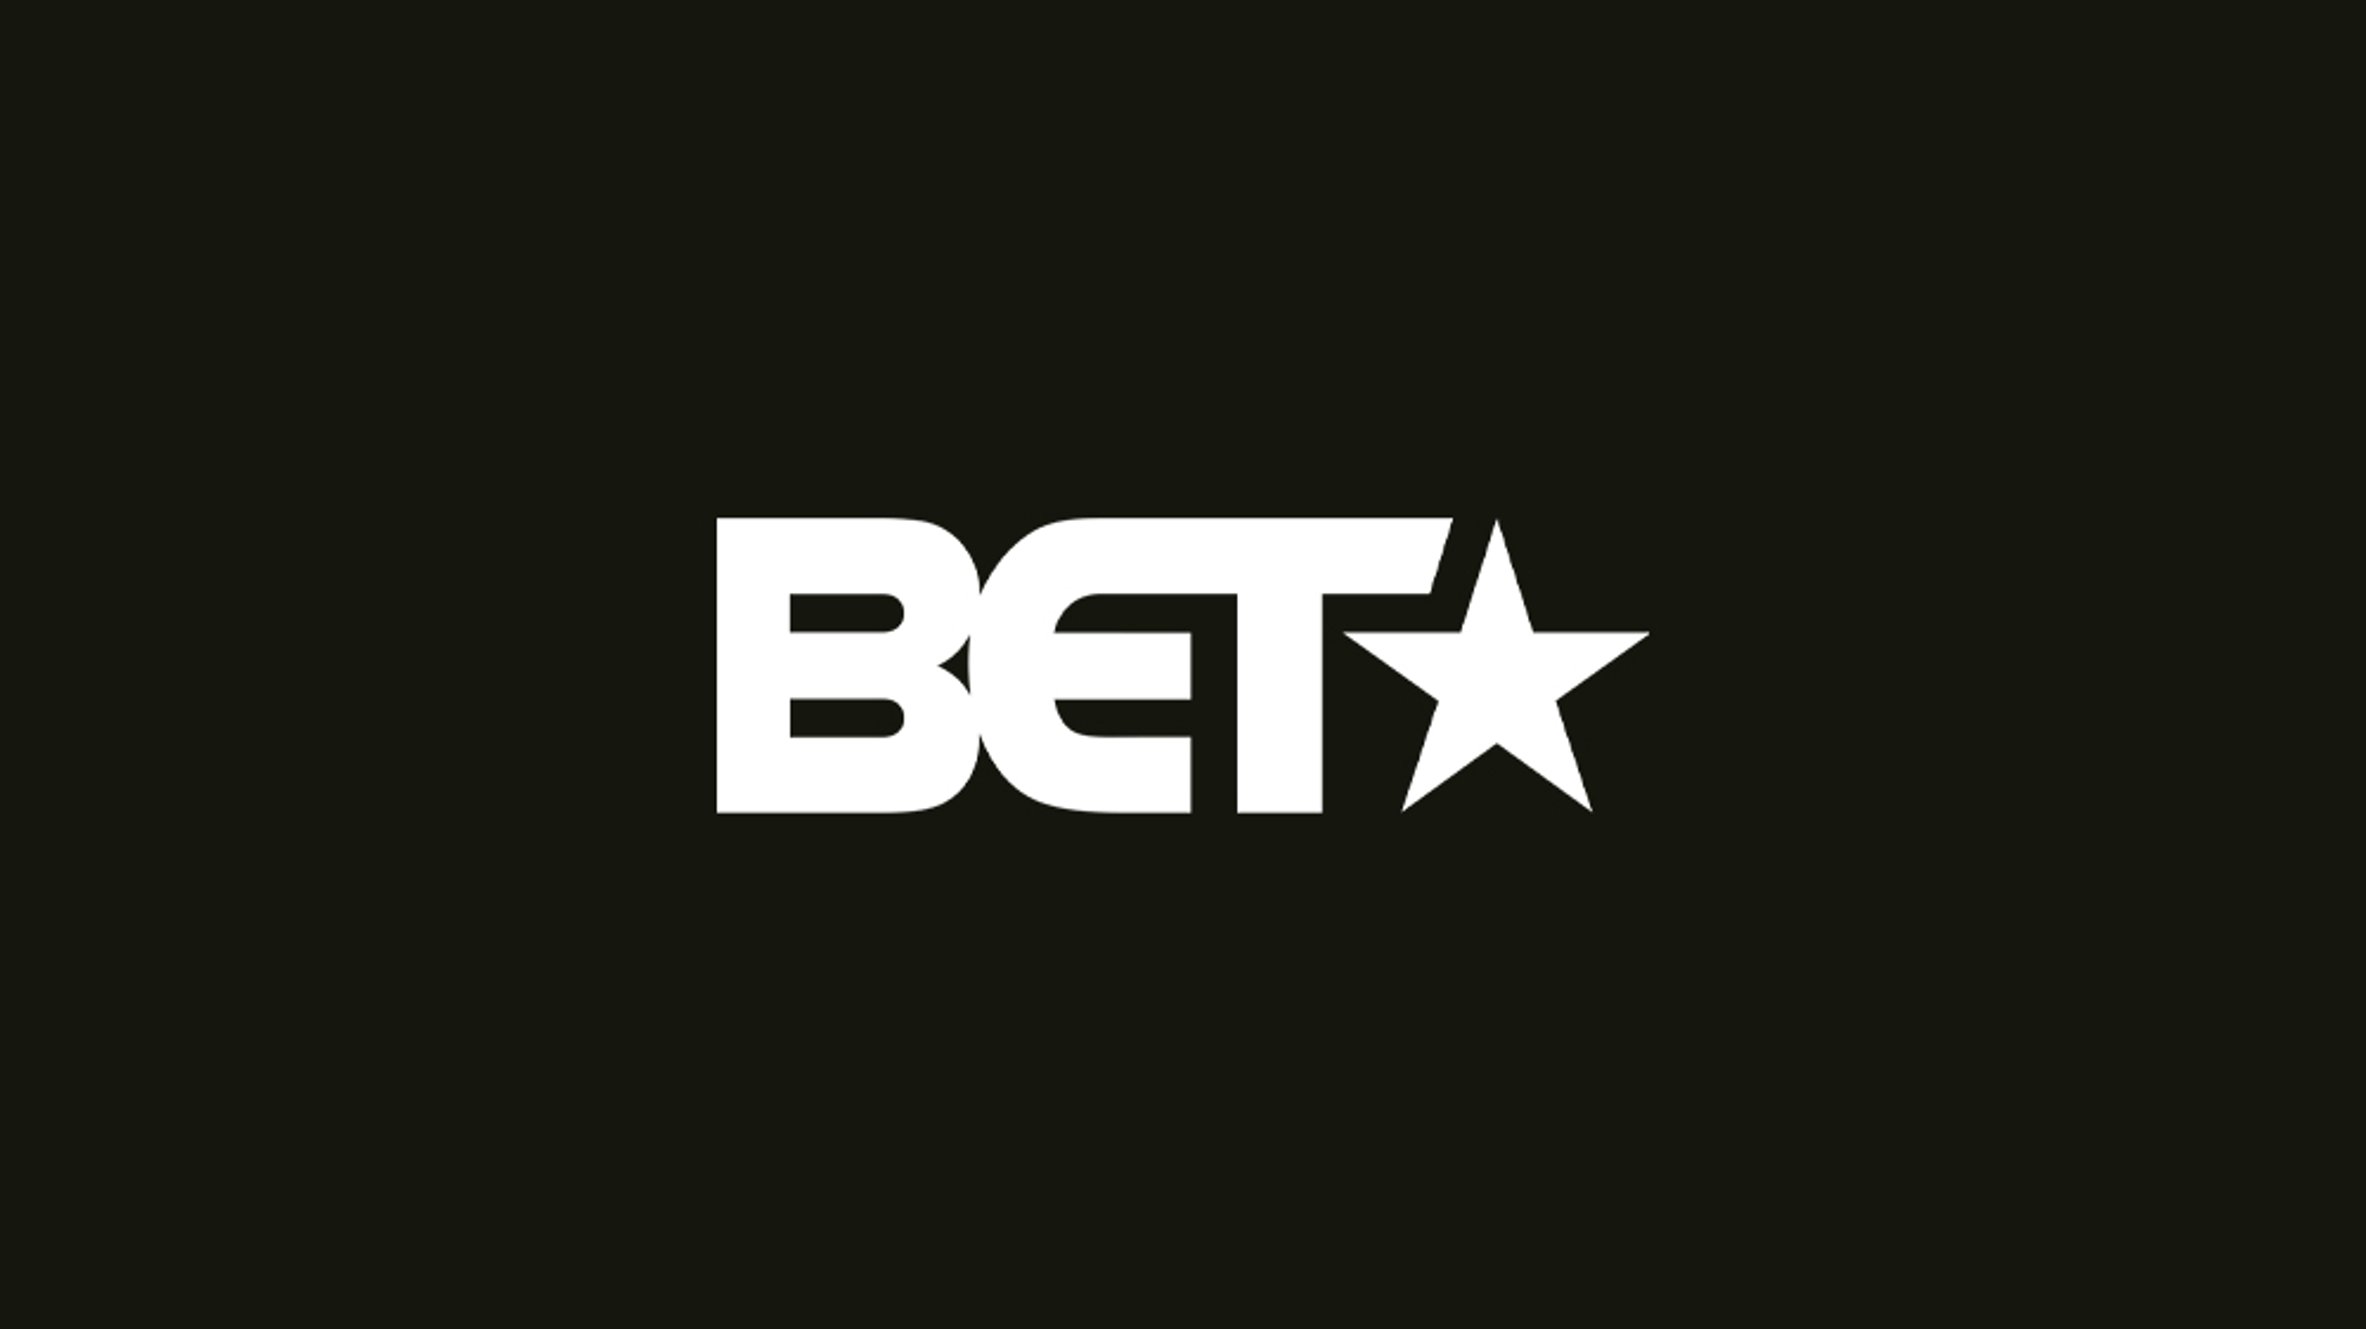 Casting extras to work on the BET+ TV Series Kingdom Business Season 1 for scenes filming in Atlanta, GA.